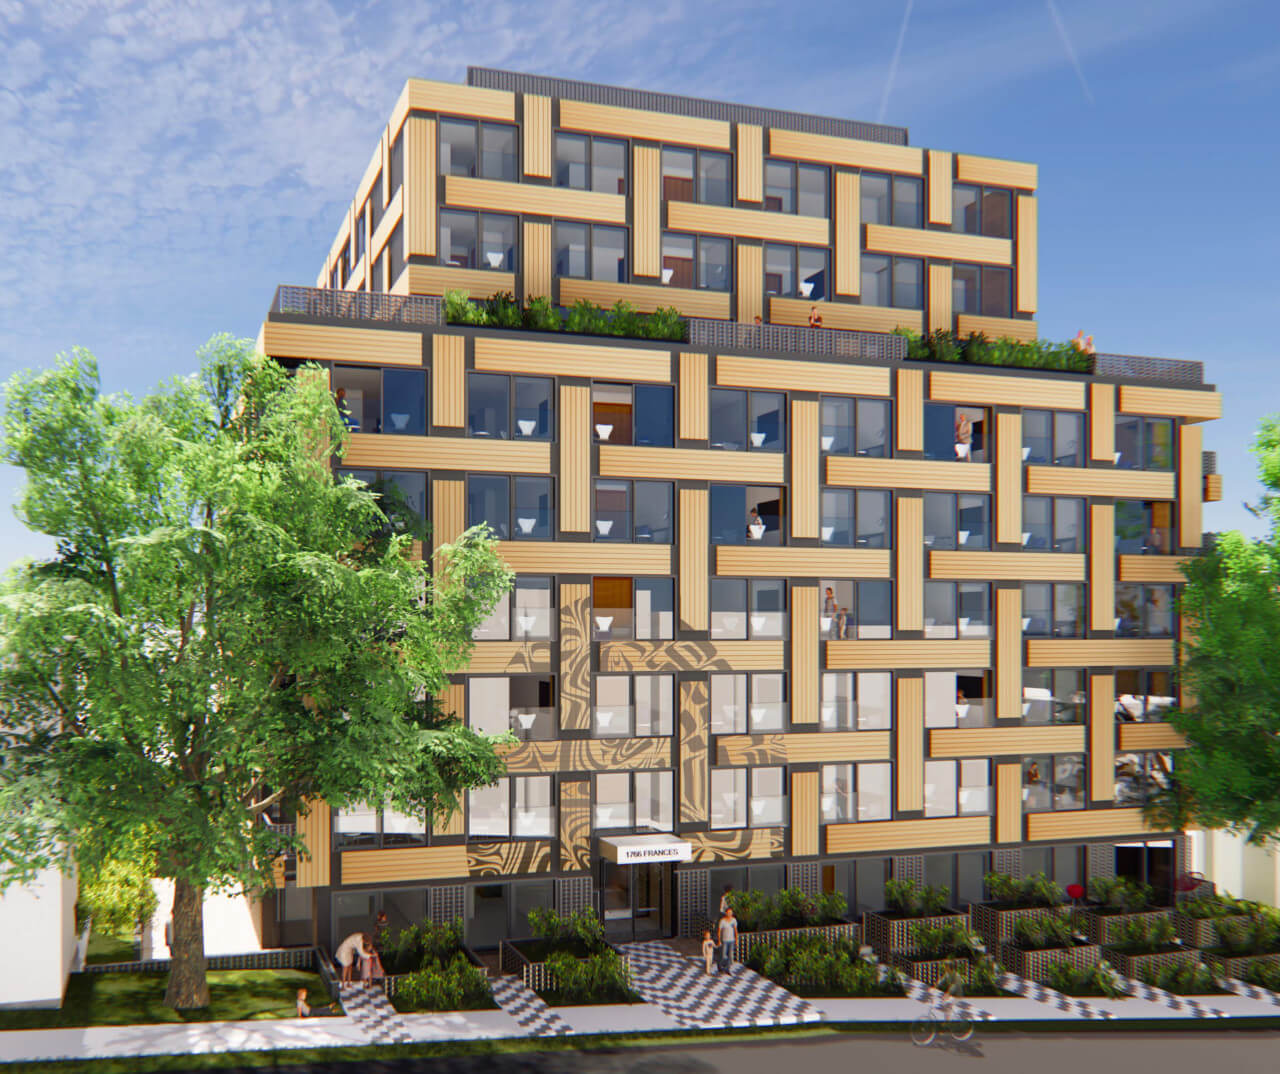 exterior rendering of a basket shaped building with timber panels